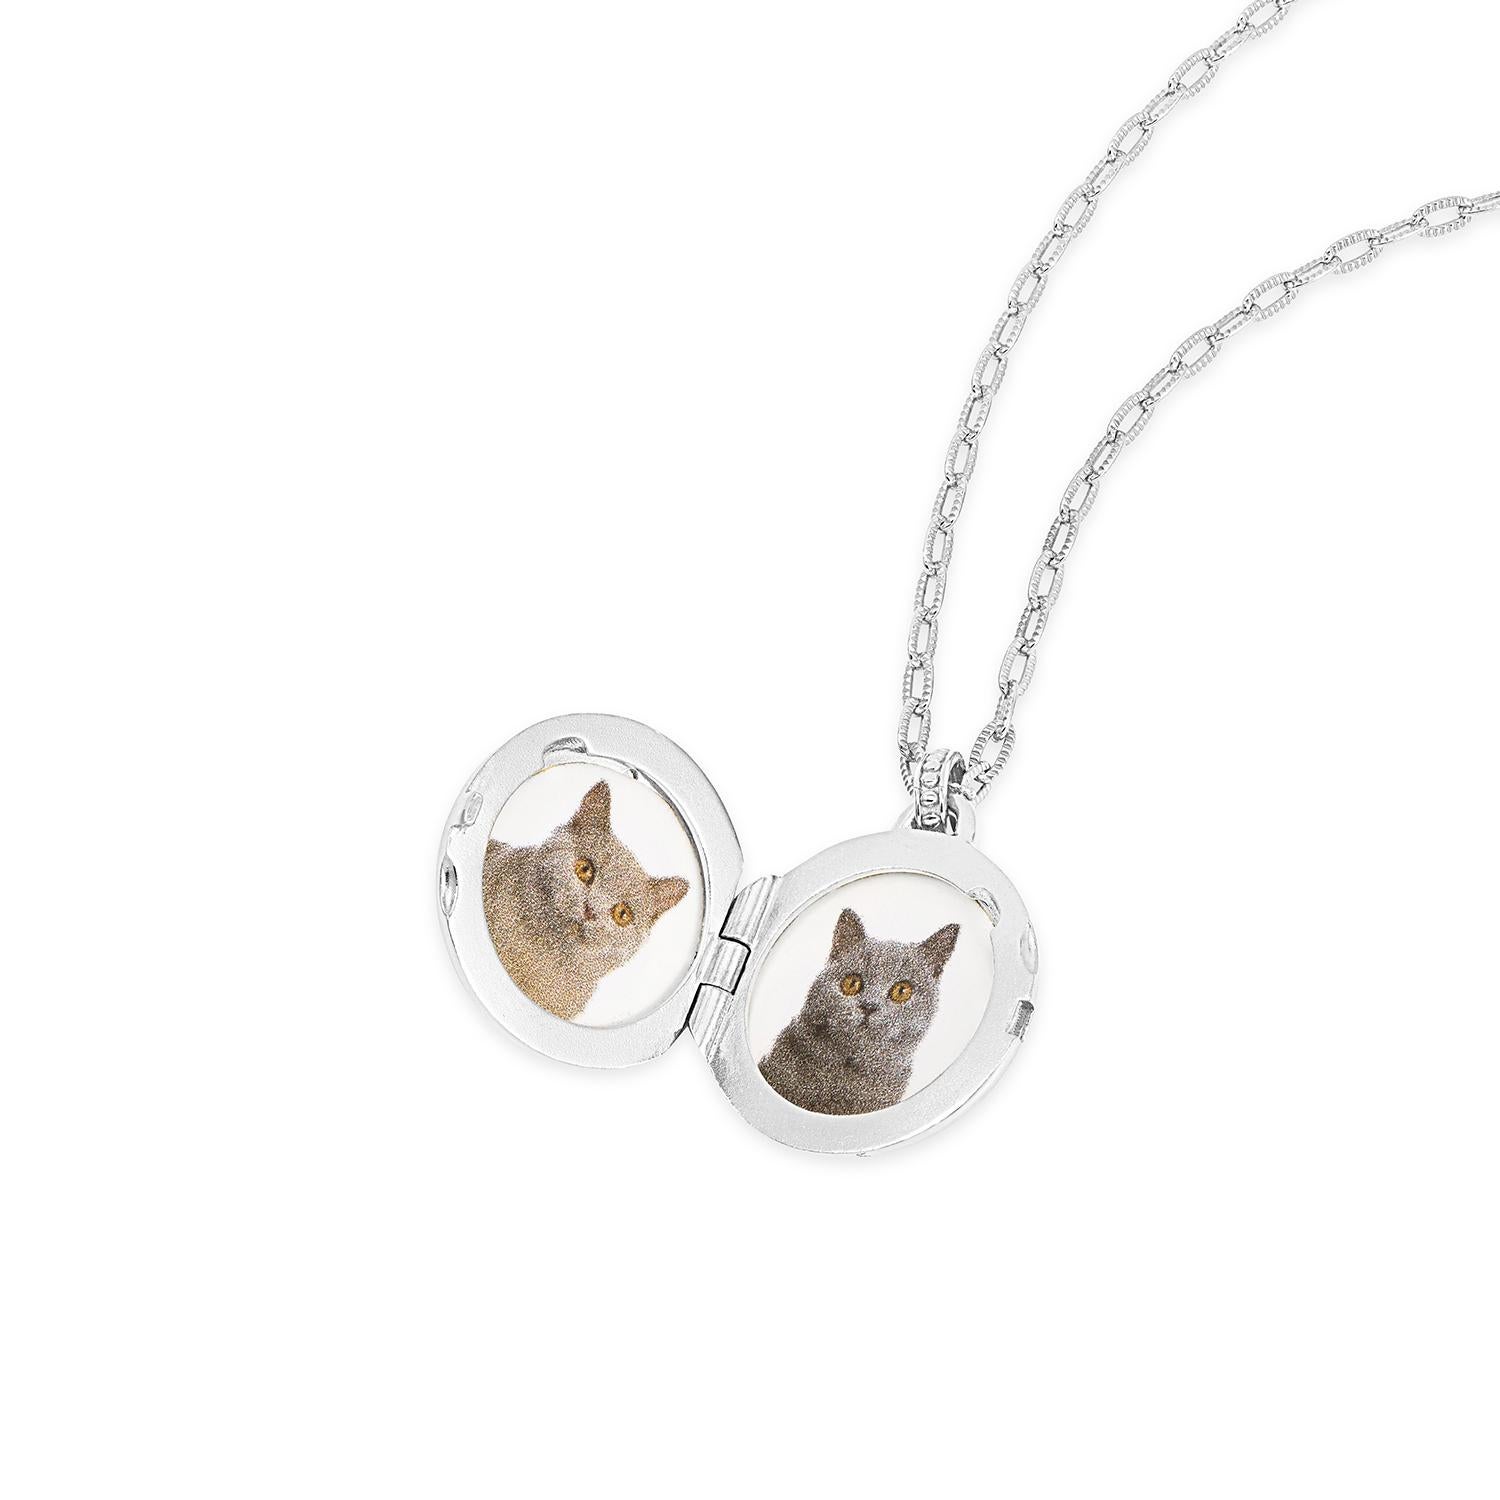 Set with four sparkling white sapphires, our timeless, sterling silver 'Gleam' locket is perfect to mark life's special moments. The round locket is suspended on our beautifully-textured, adjustable millie-grain chain and finished with our signature